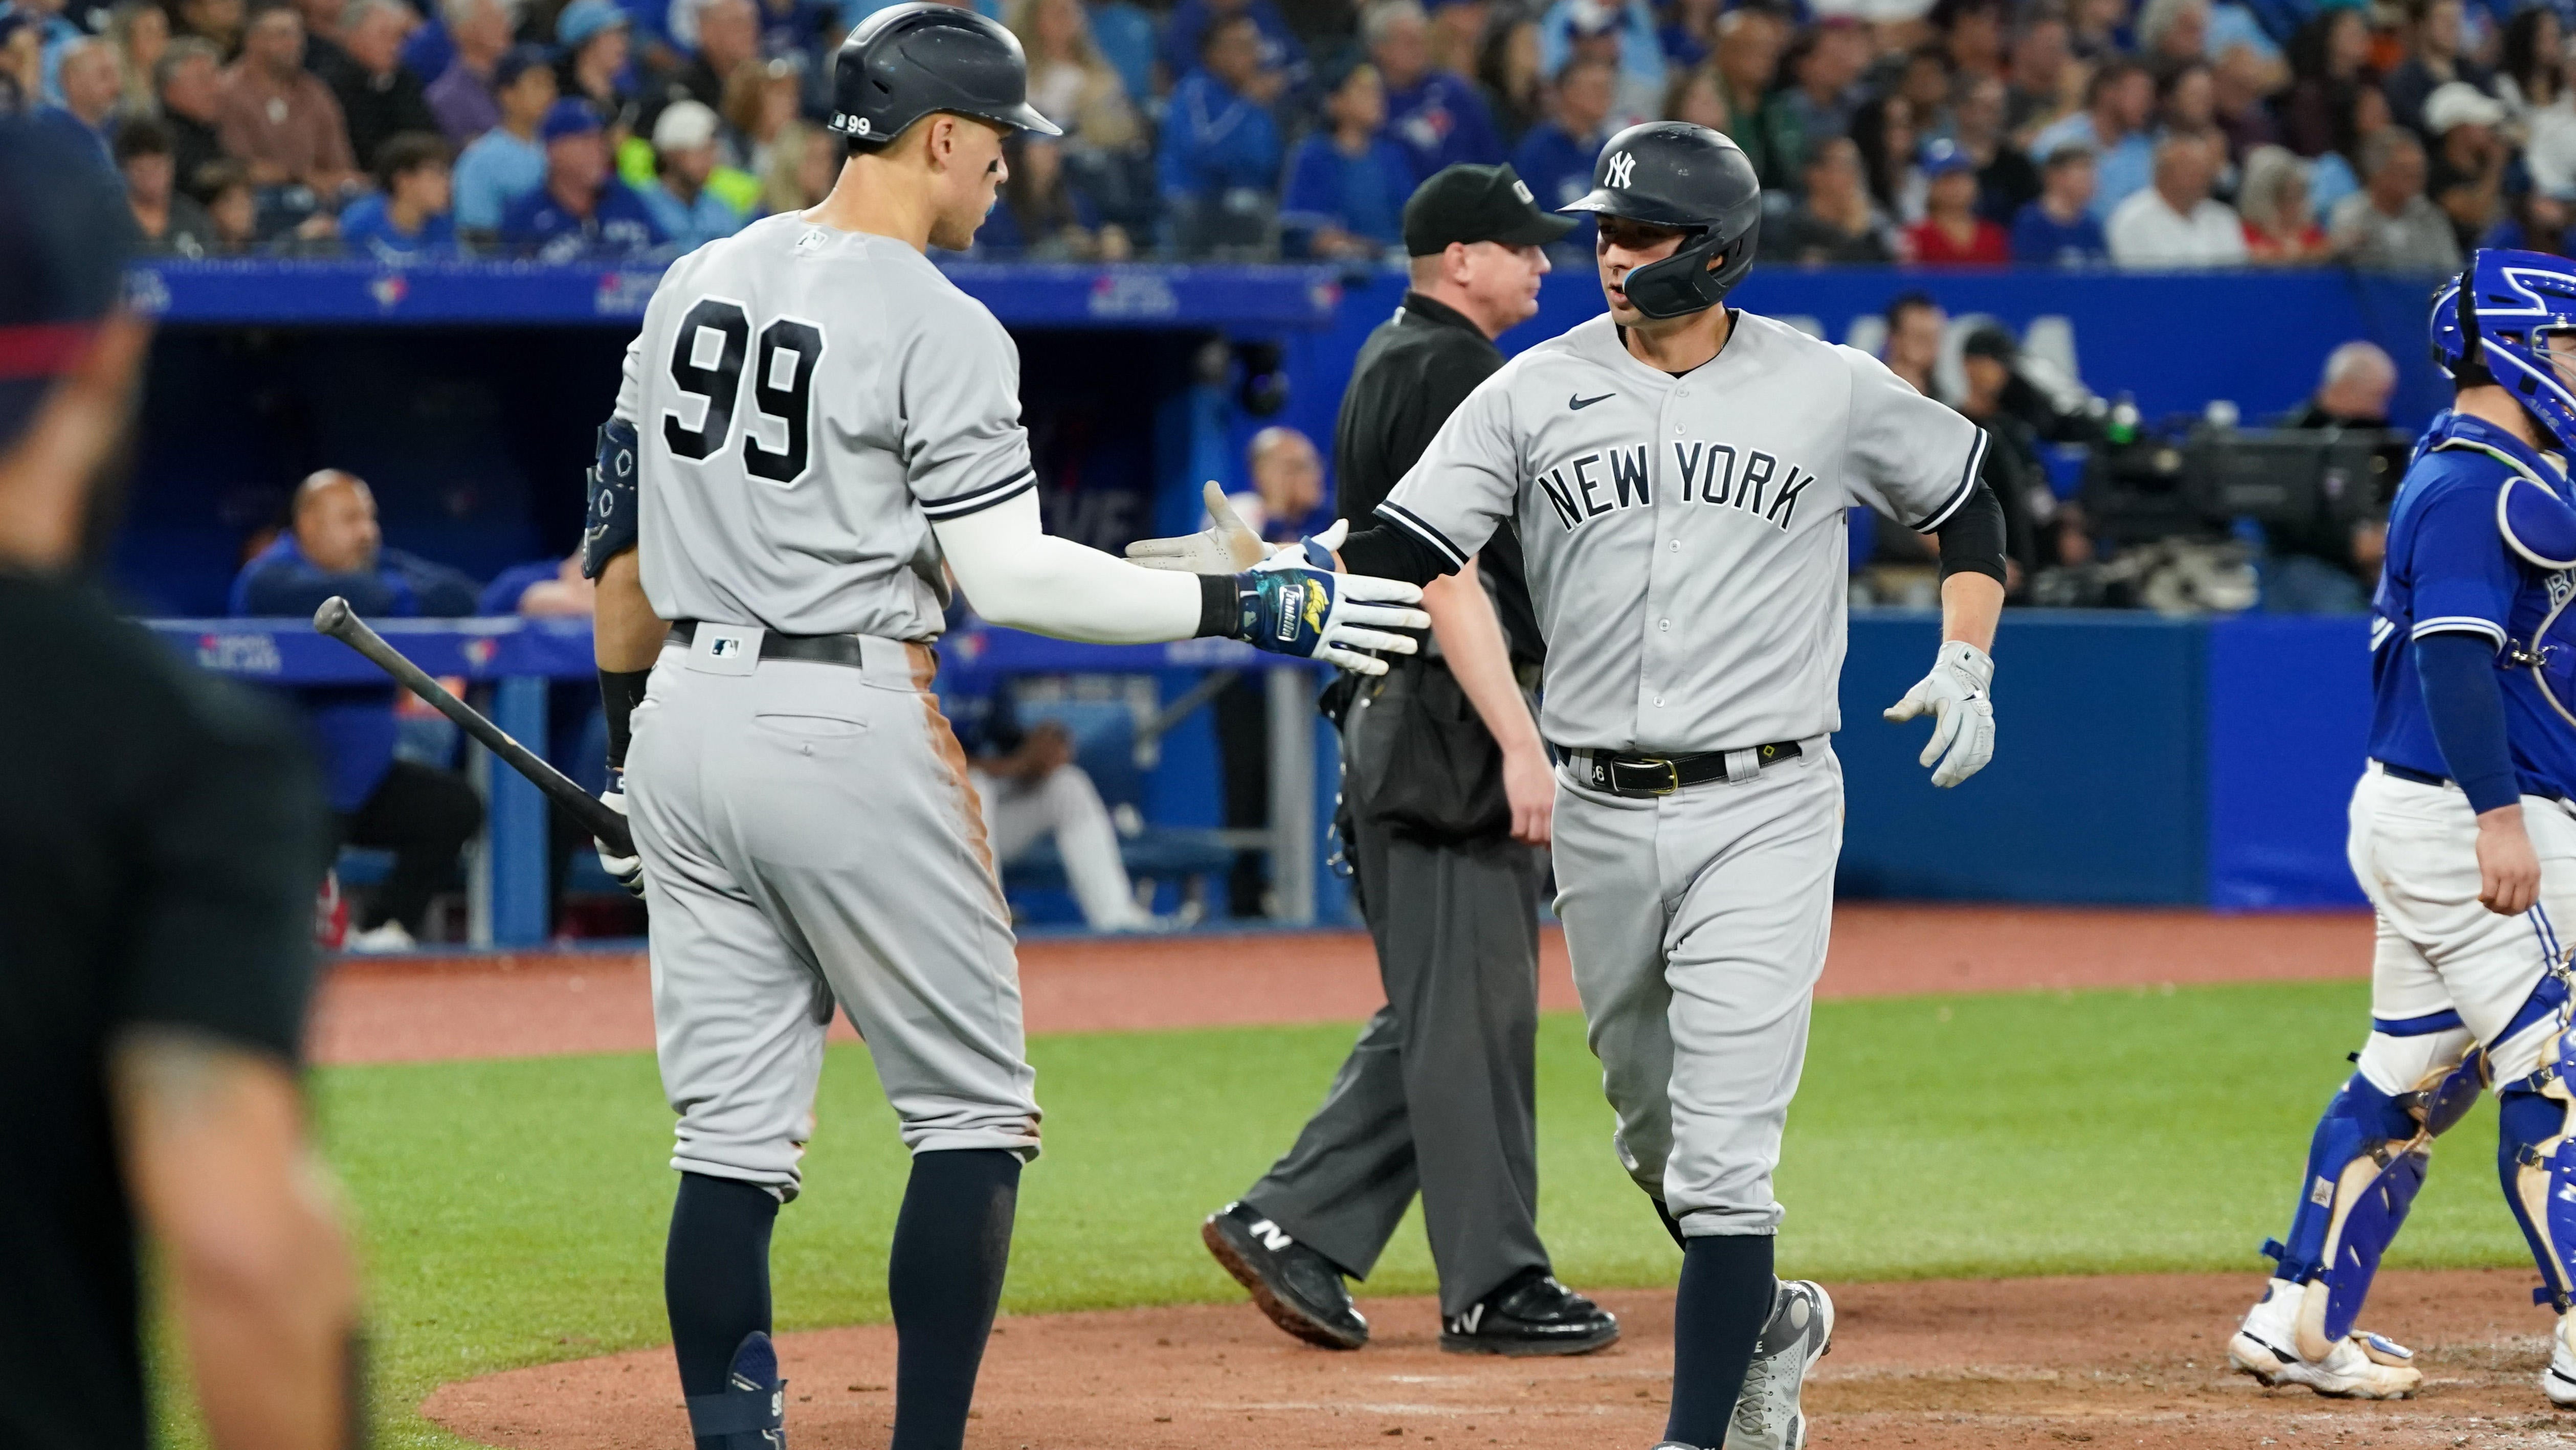 Yankees clinch AL East but Aaron Judge stuck on 60 in home-run